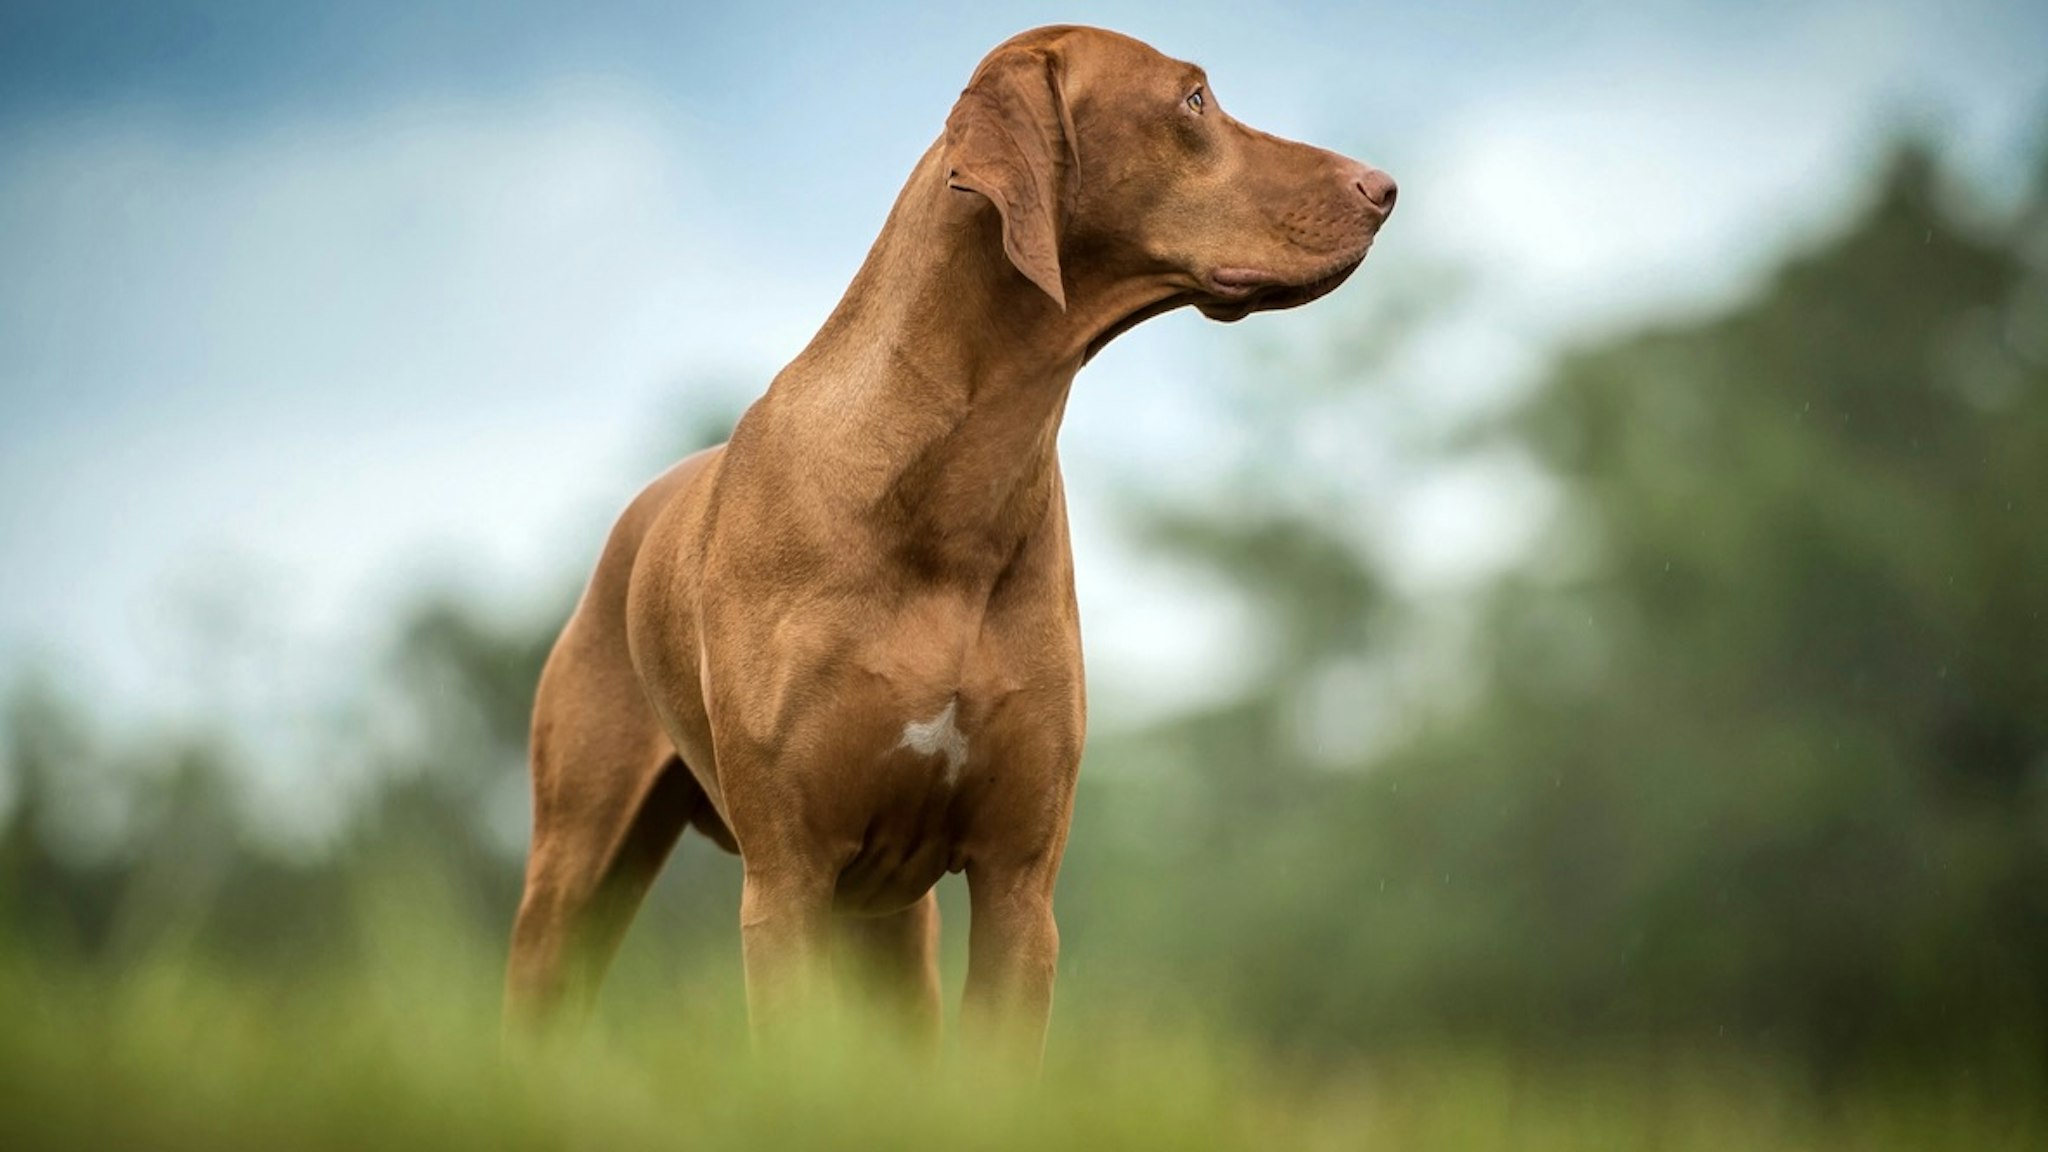 Vizsla looking to the side - stock photo A Vizsla looks off to the side while standing in a field of grass. Hillary Kladke via Getty Images